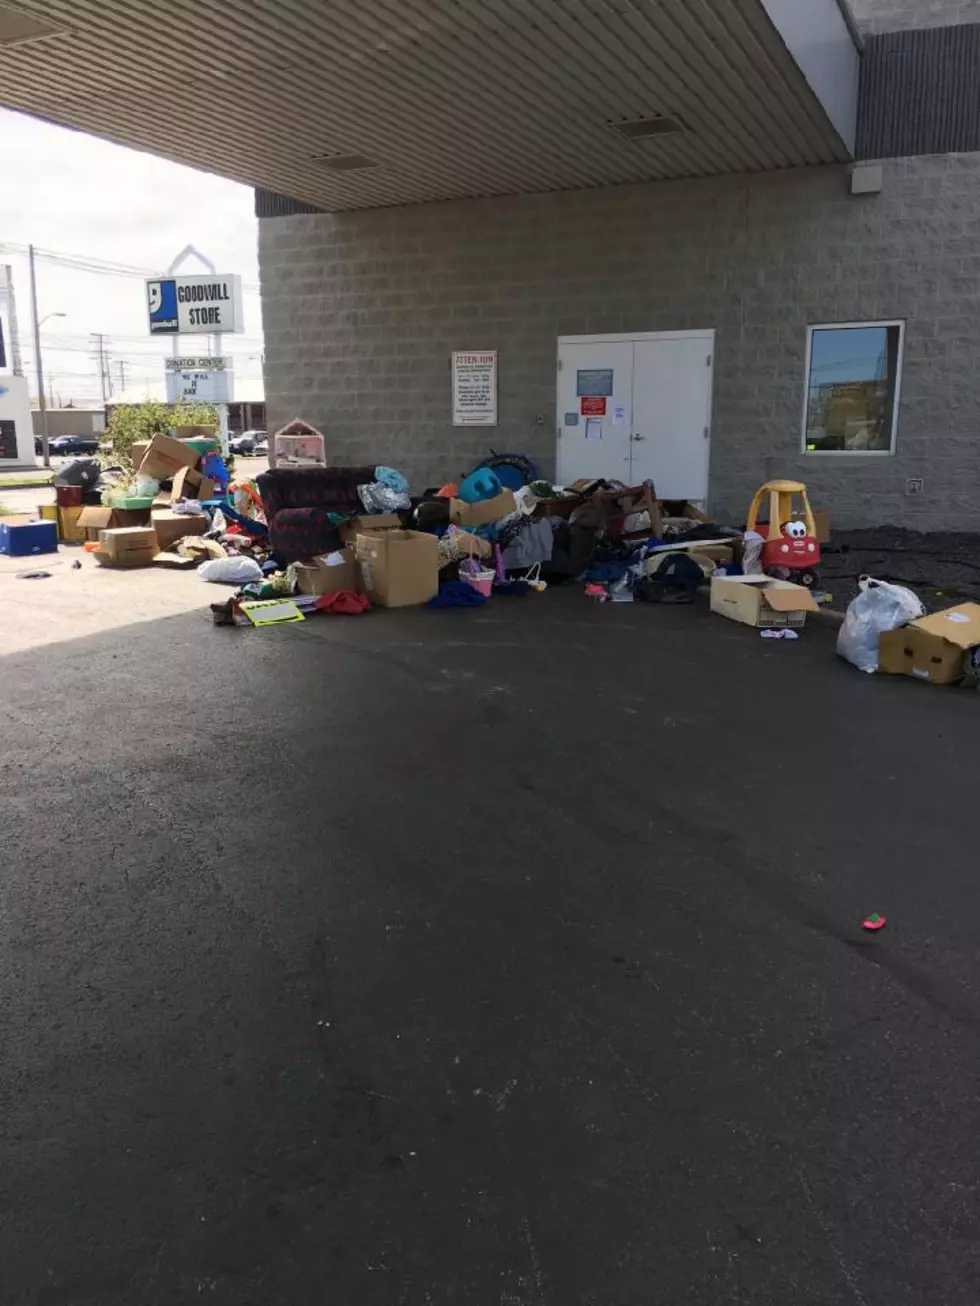 Goodwill Asking the Public to Temporarily Hold Onto Their Donations